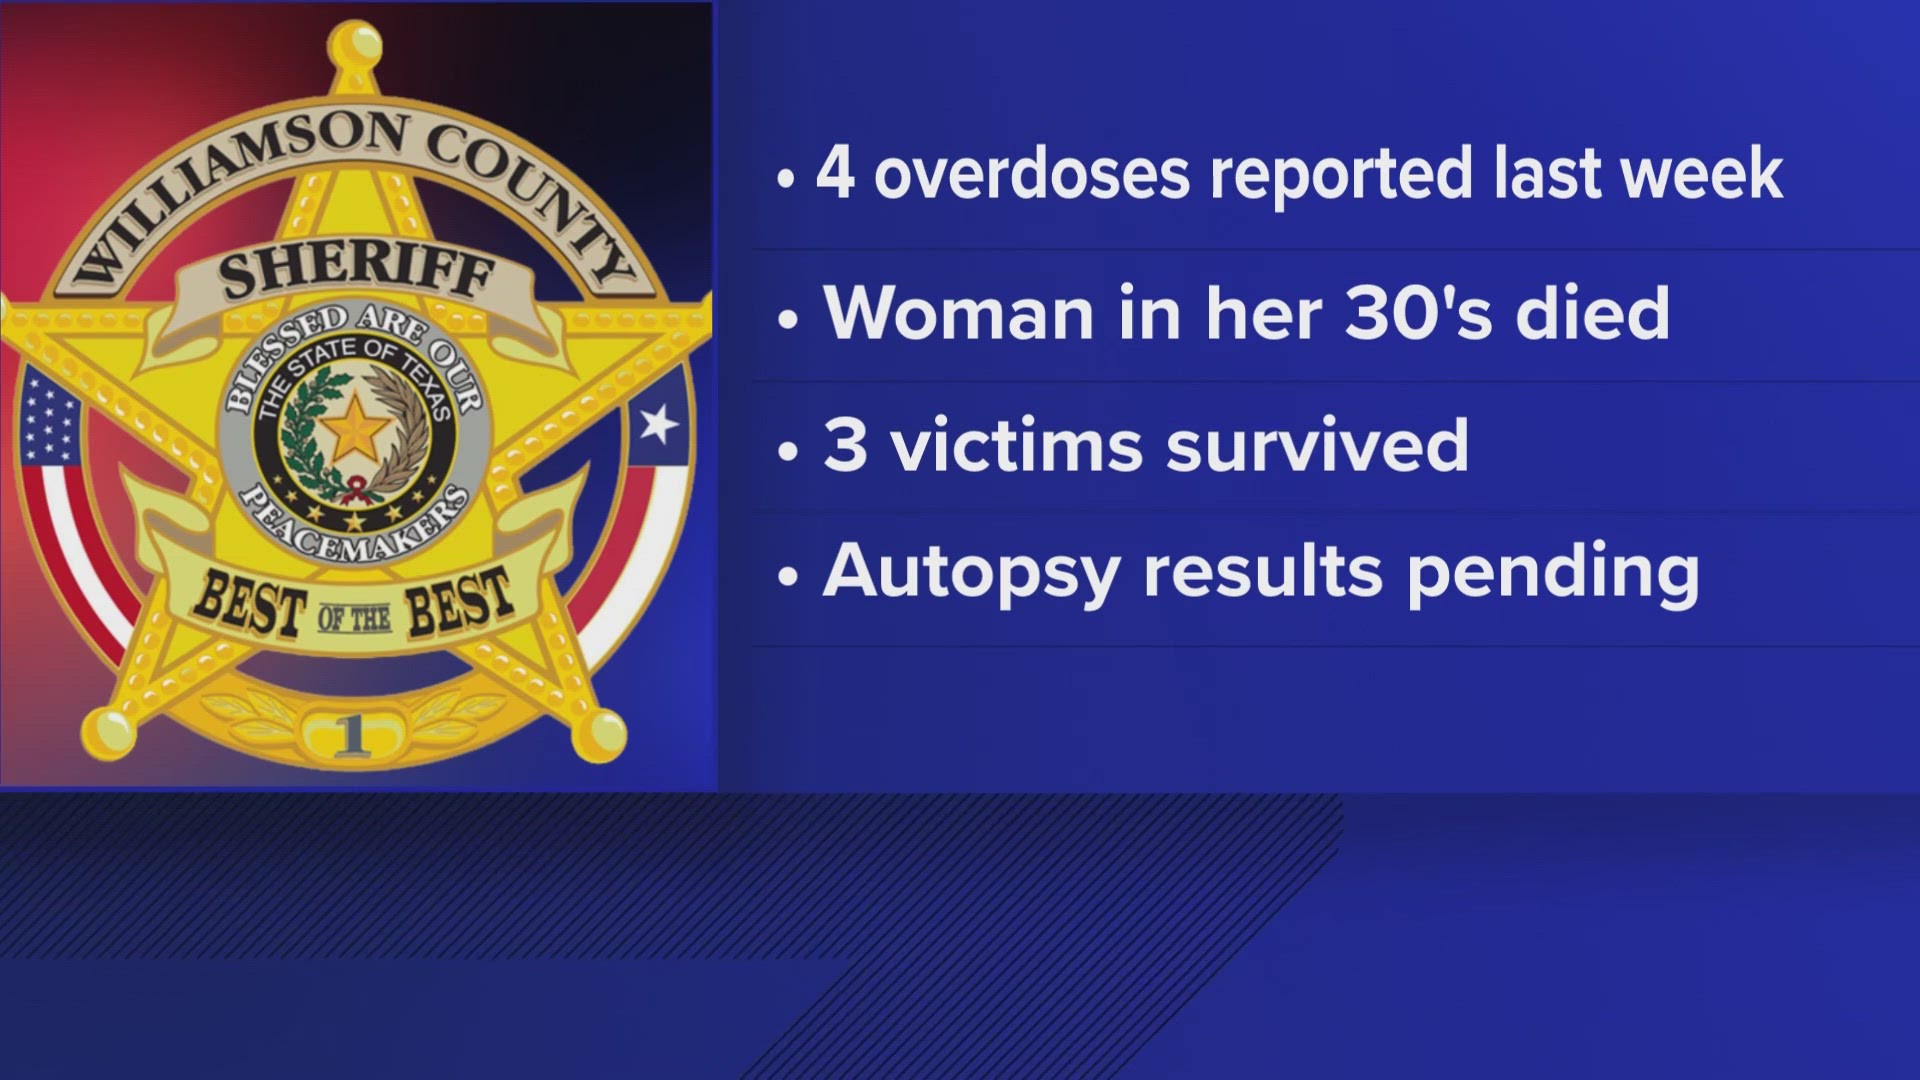 The Williamson County Sheriff's Department is investigating an uptick in fentanyl overdoses, saying it responded to four suspected cases last week alone.